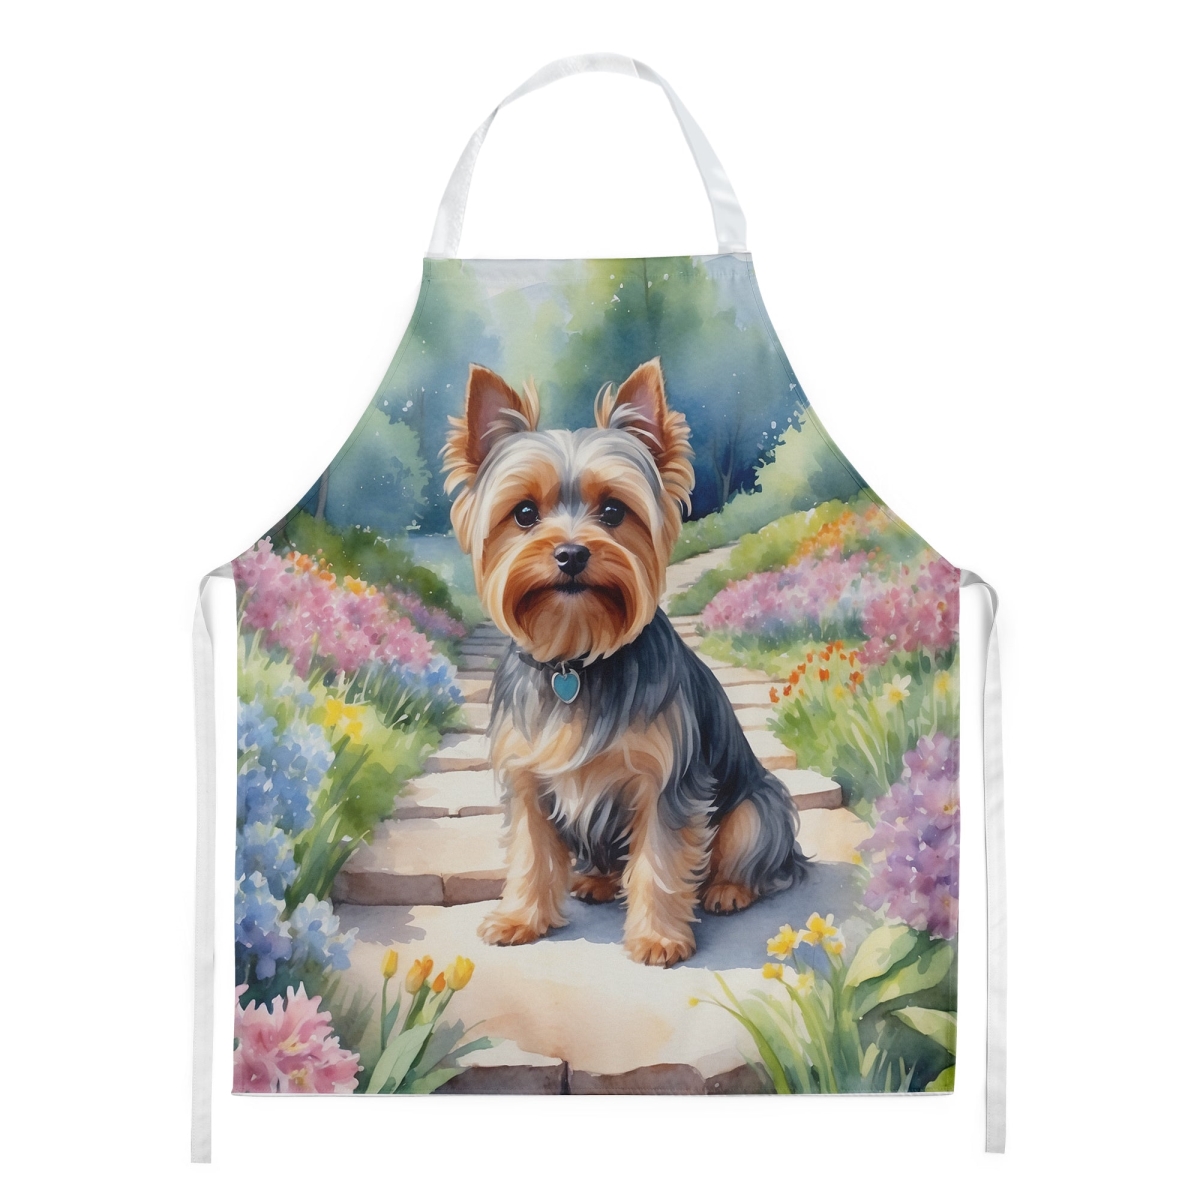 Picture of Carolines Treasures DAC6736APRON 30 x 27 in. Yorkshire Terrier Spring Path Apron